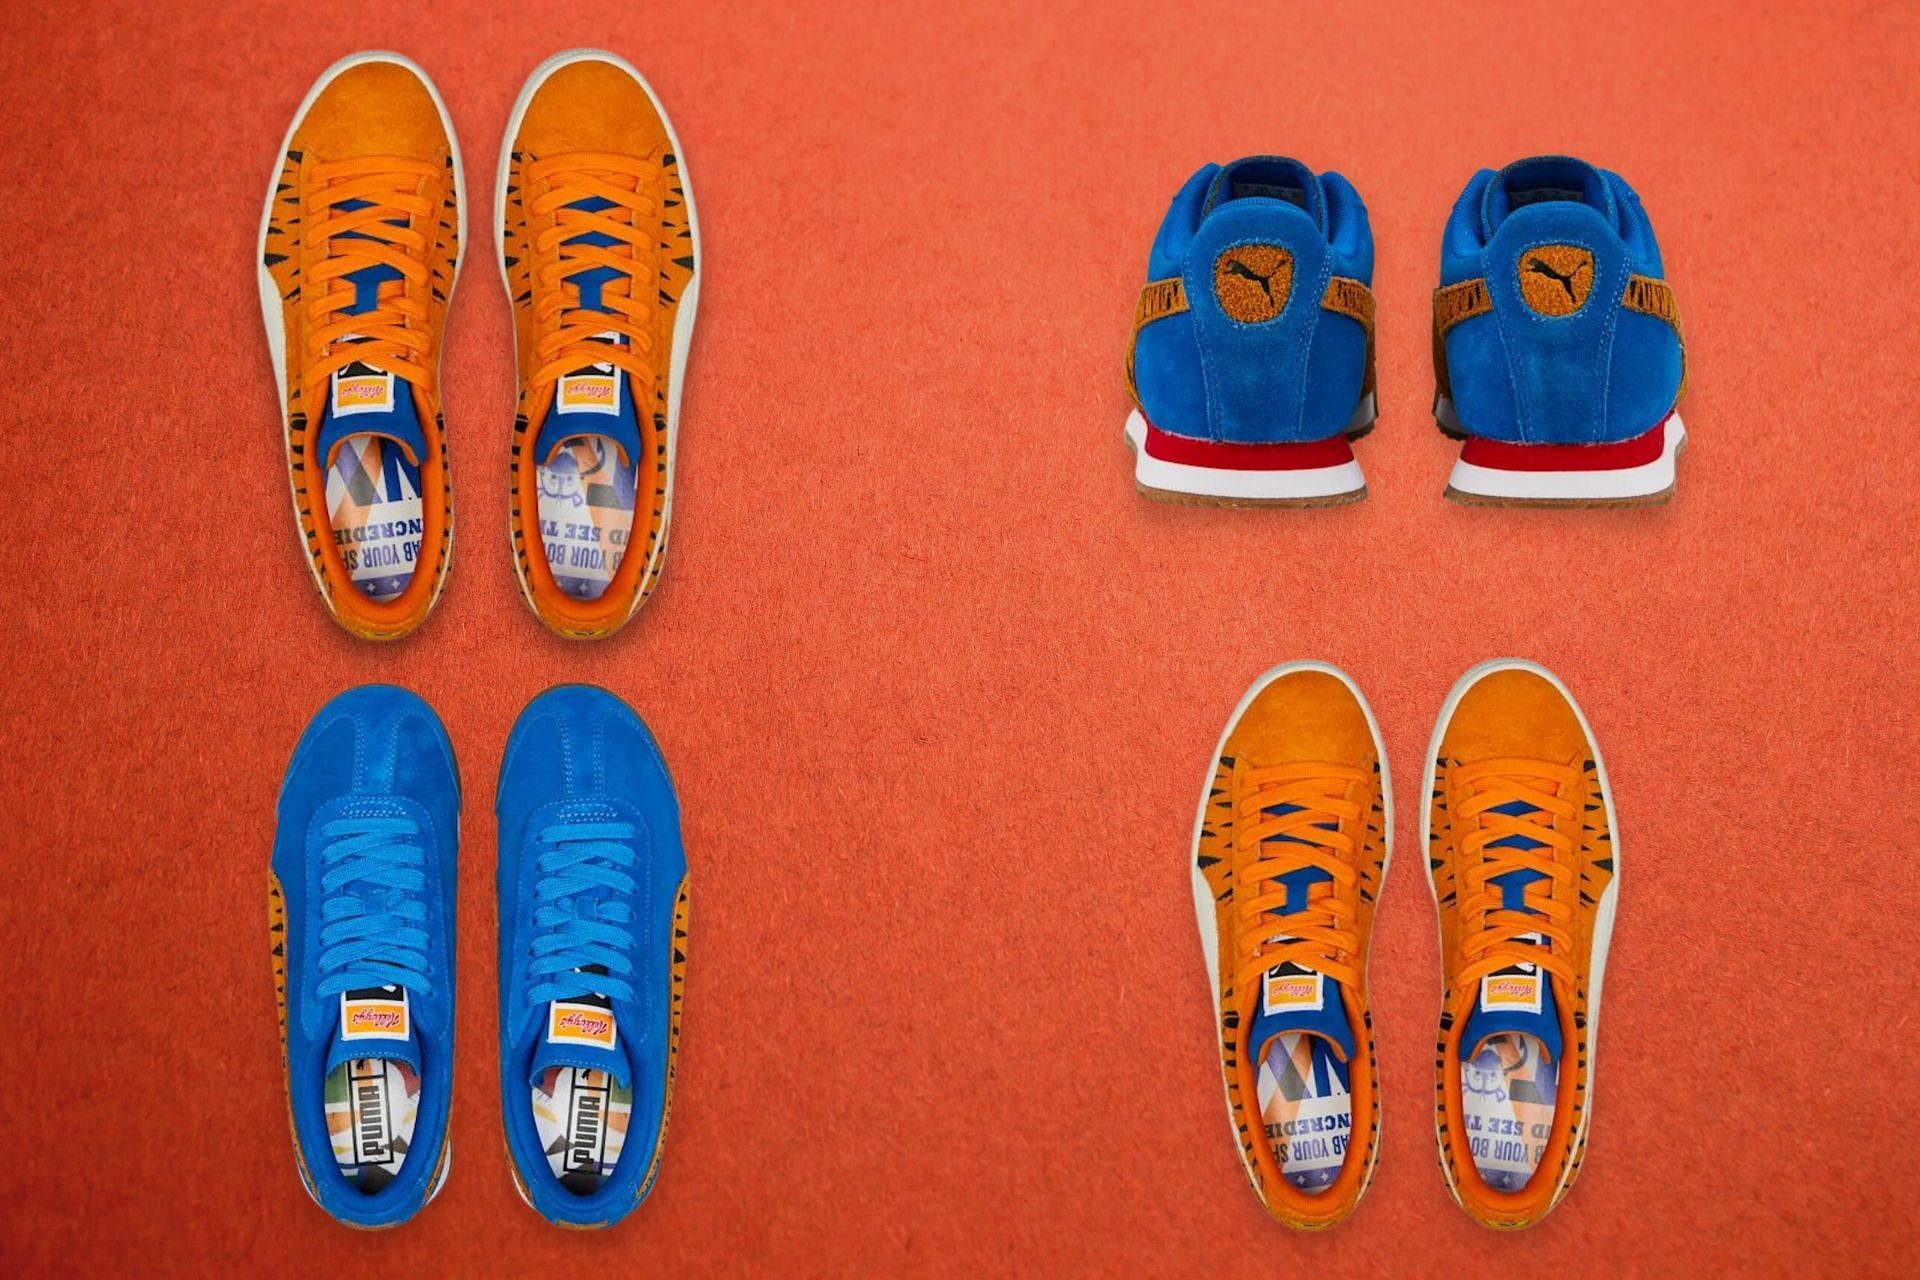 Newly released two-piece Frosted Flakes x Puma collab featuring Puma Suede and Roma celebrating the 70 years of Tony the Tiger mascot (Image via Sportskeeda)